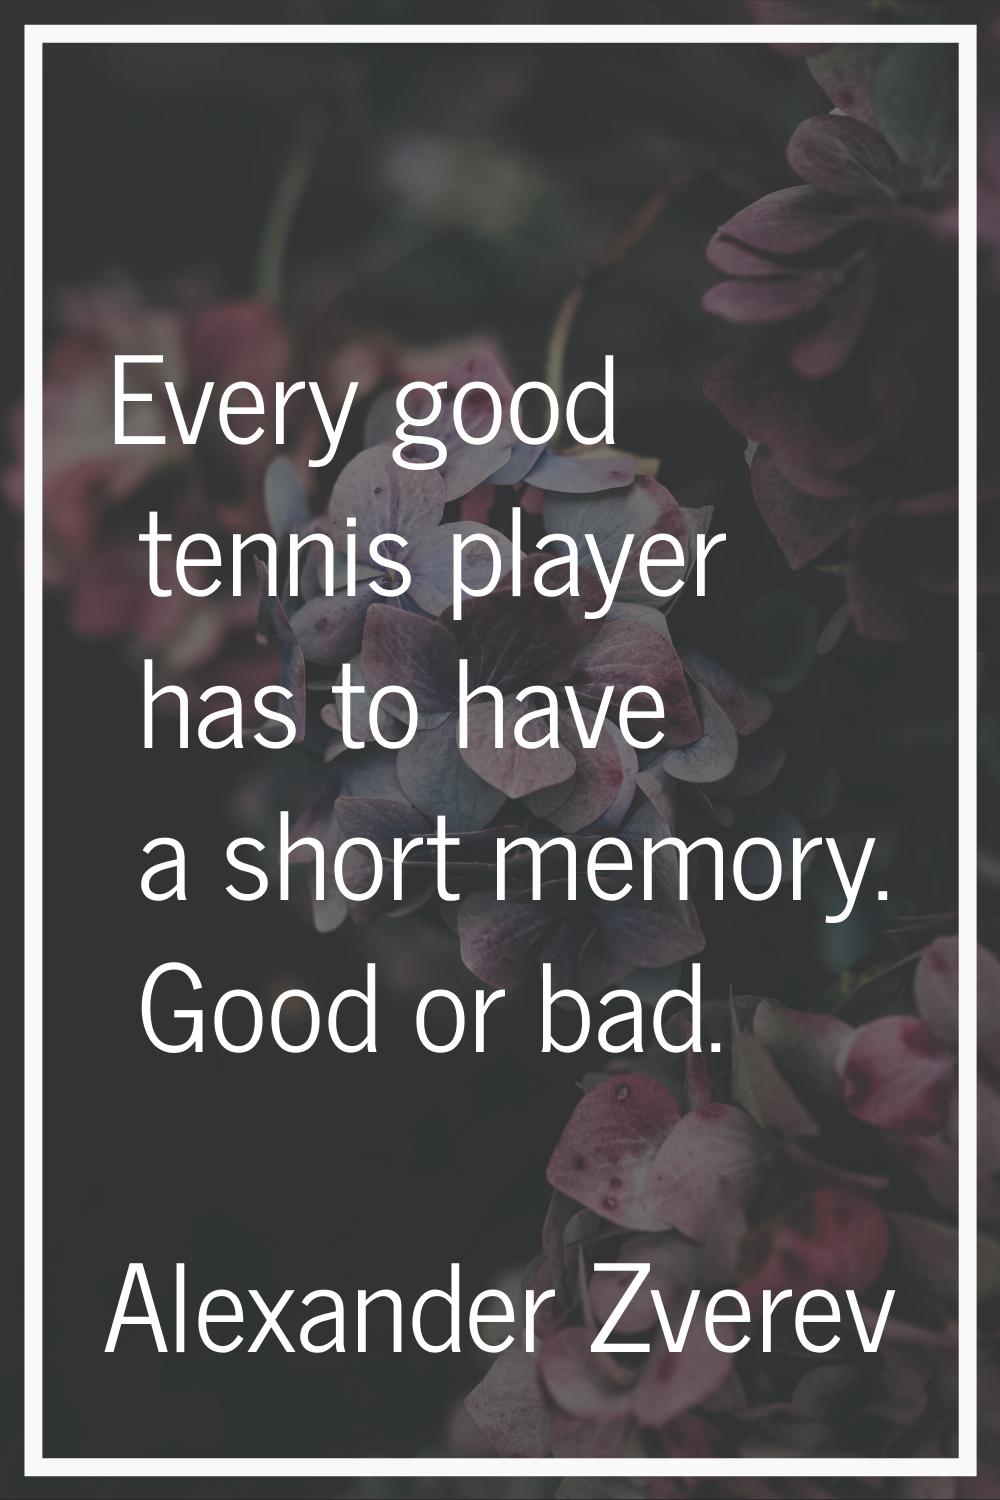 Every good tennis player has to have a short memory. Good or bad.